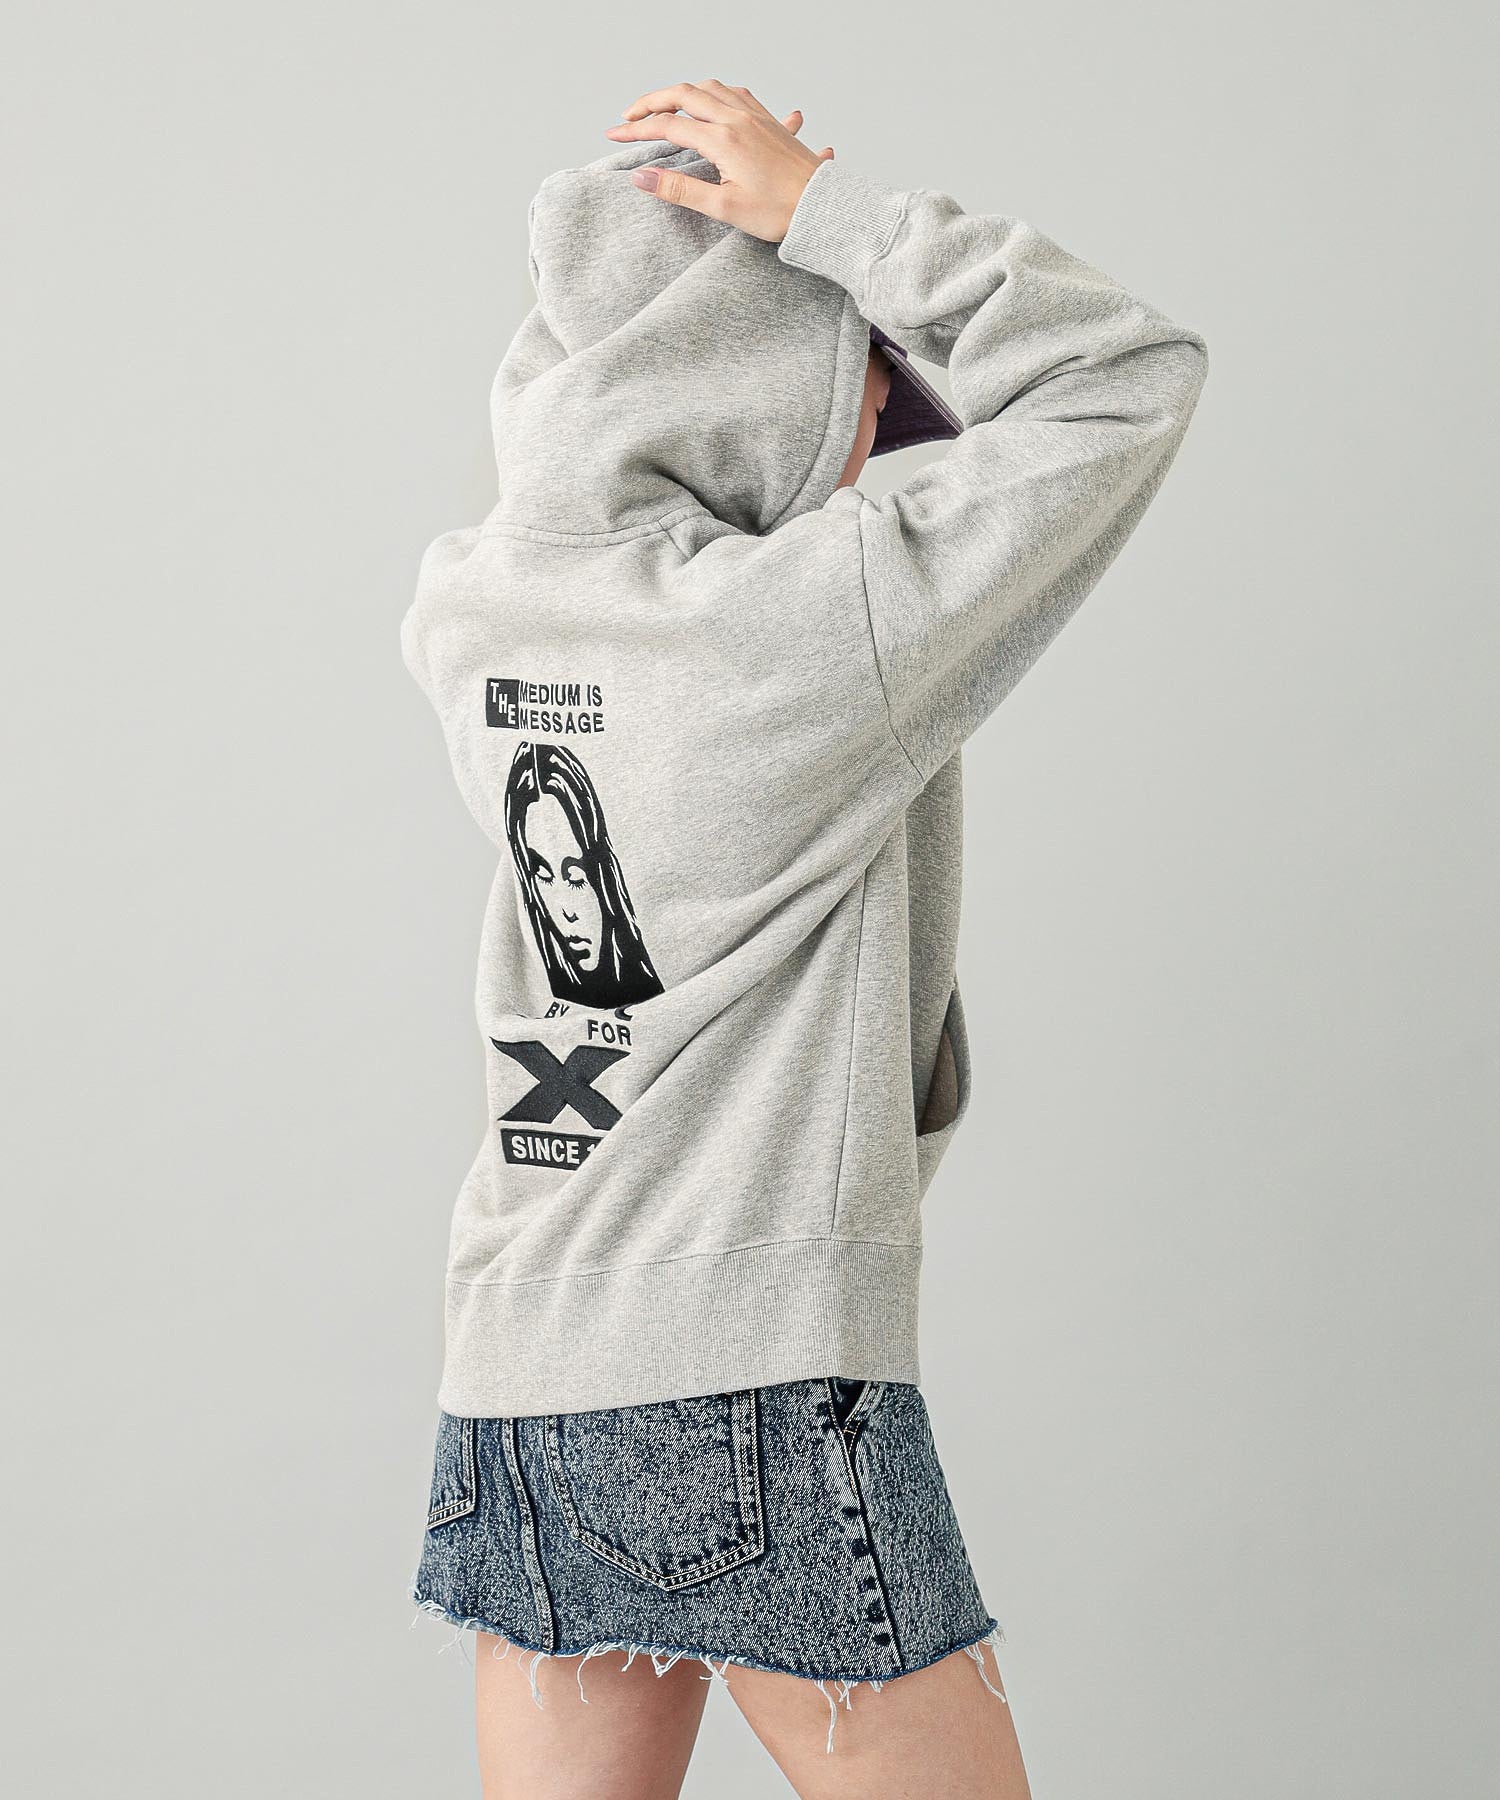 BY X-GIRL FOR X ZIP UP SWEAT HOODIE